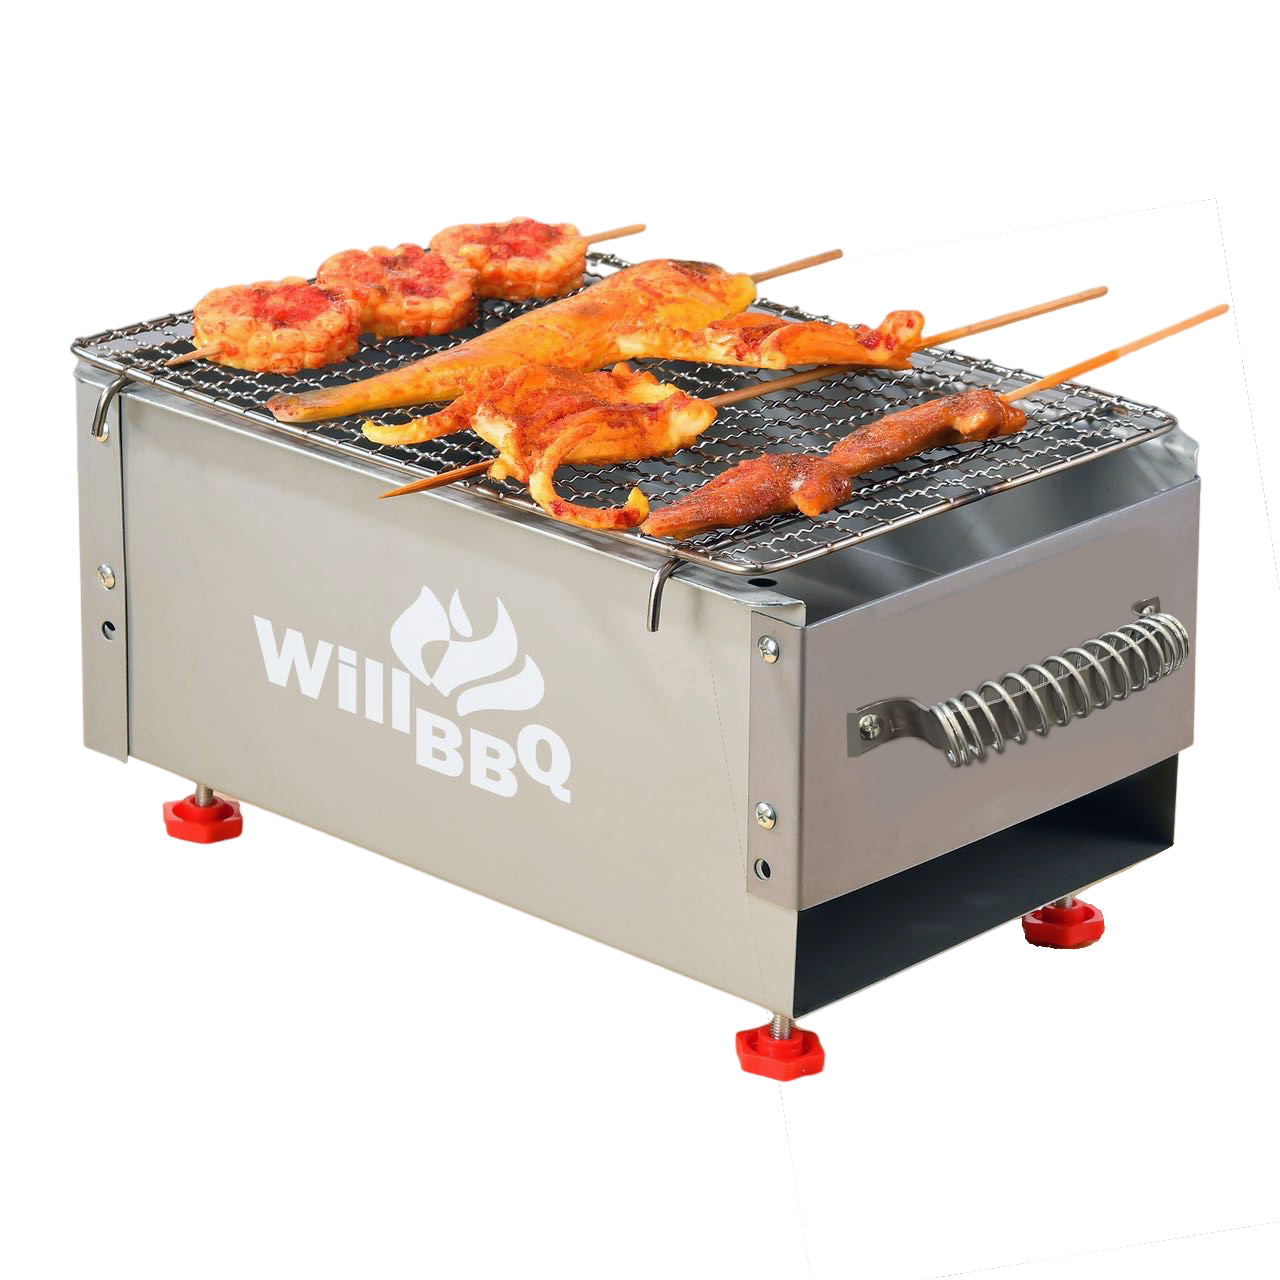 Commercial Quality Outdoor Portable Charcoal Hibachi BBQ Camping Barbecue Grill